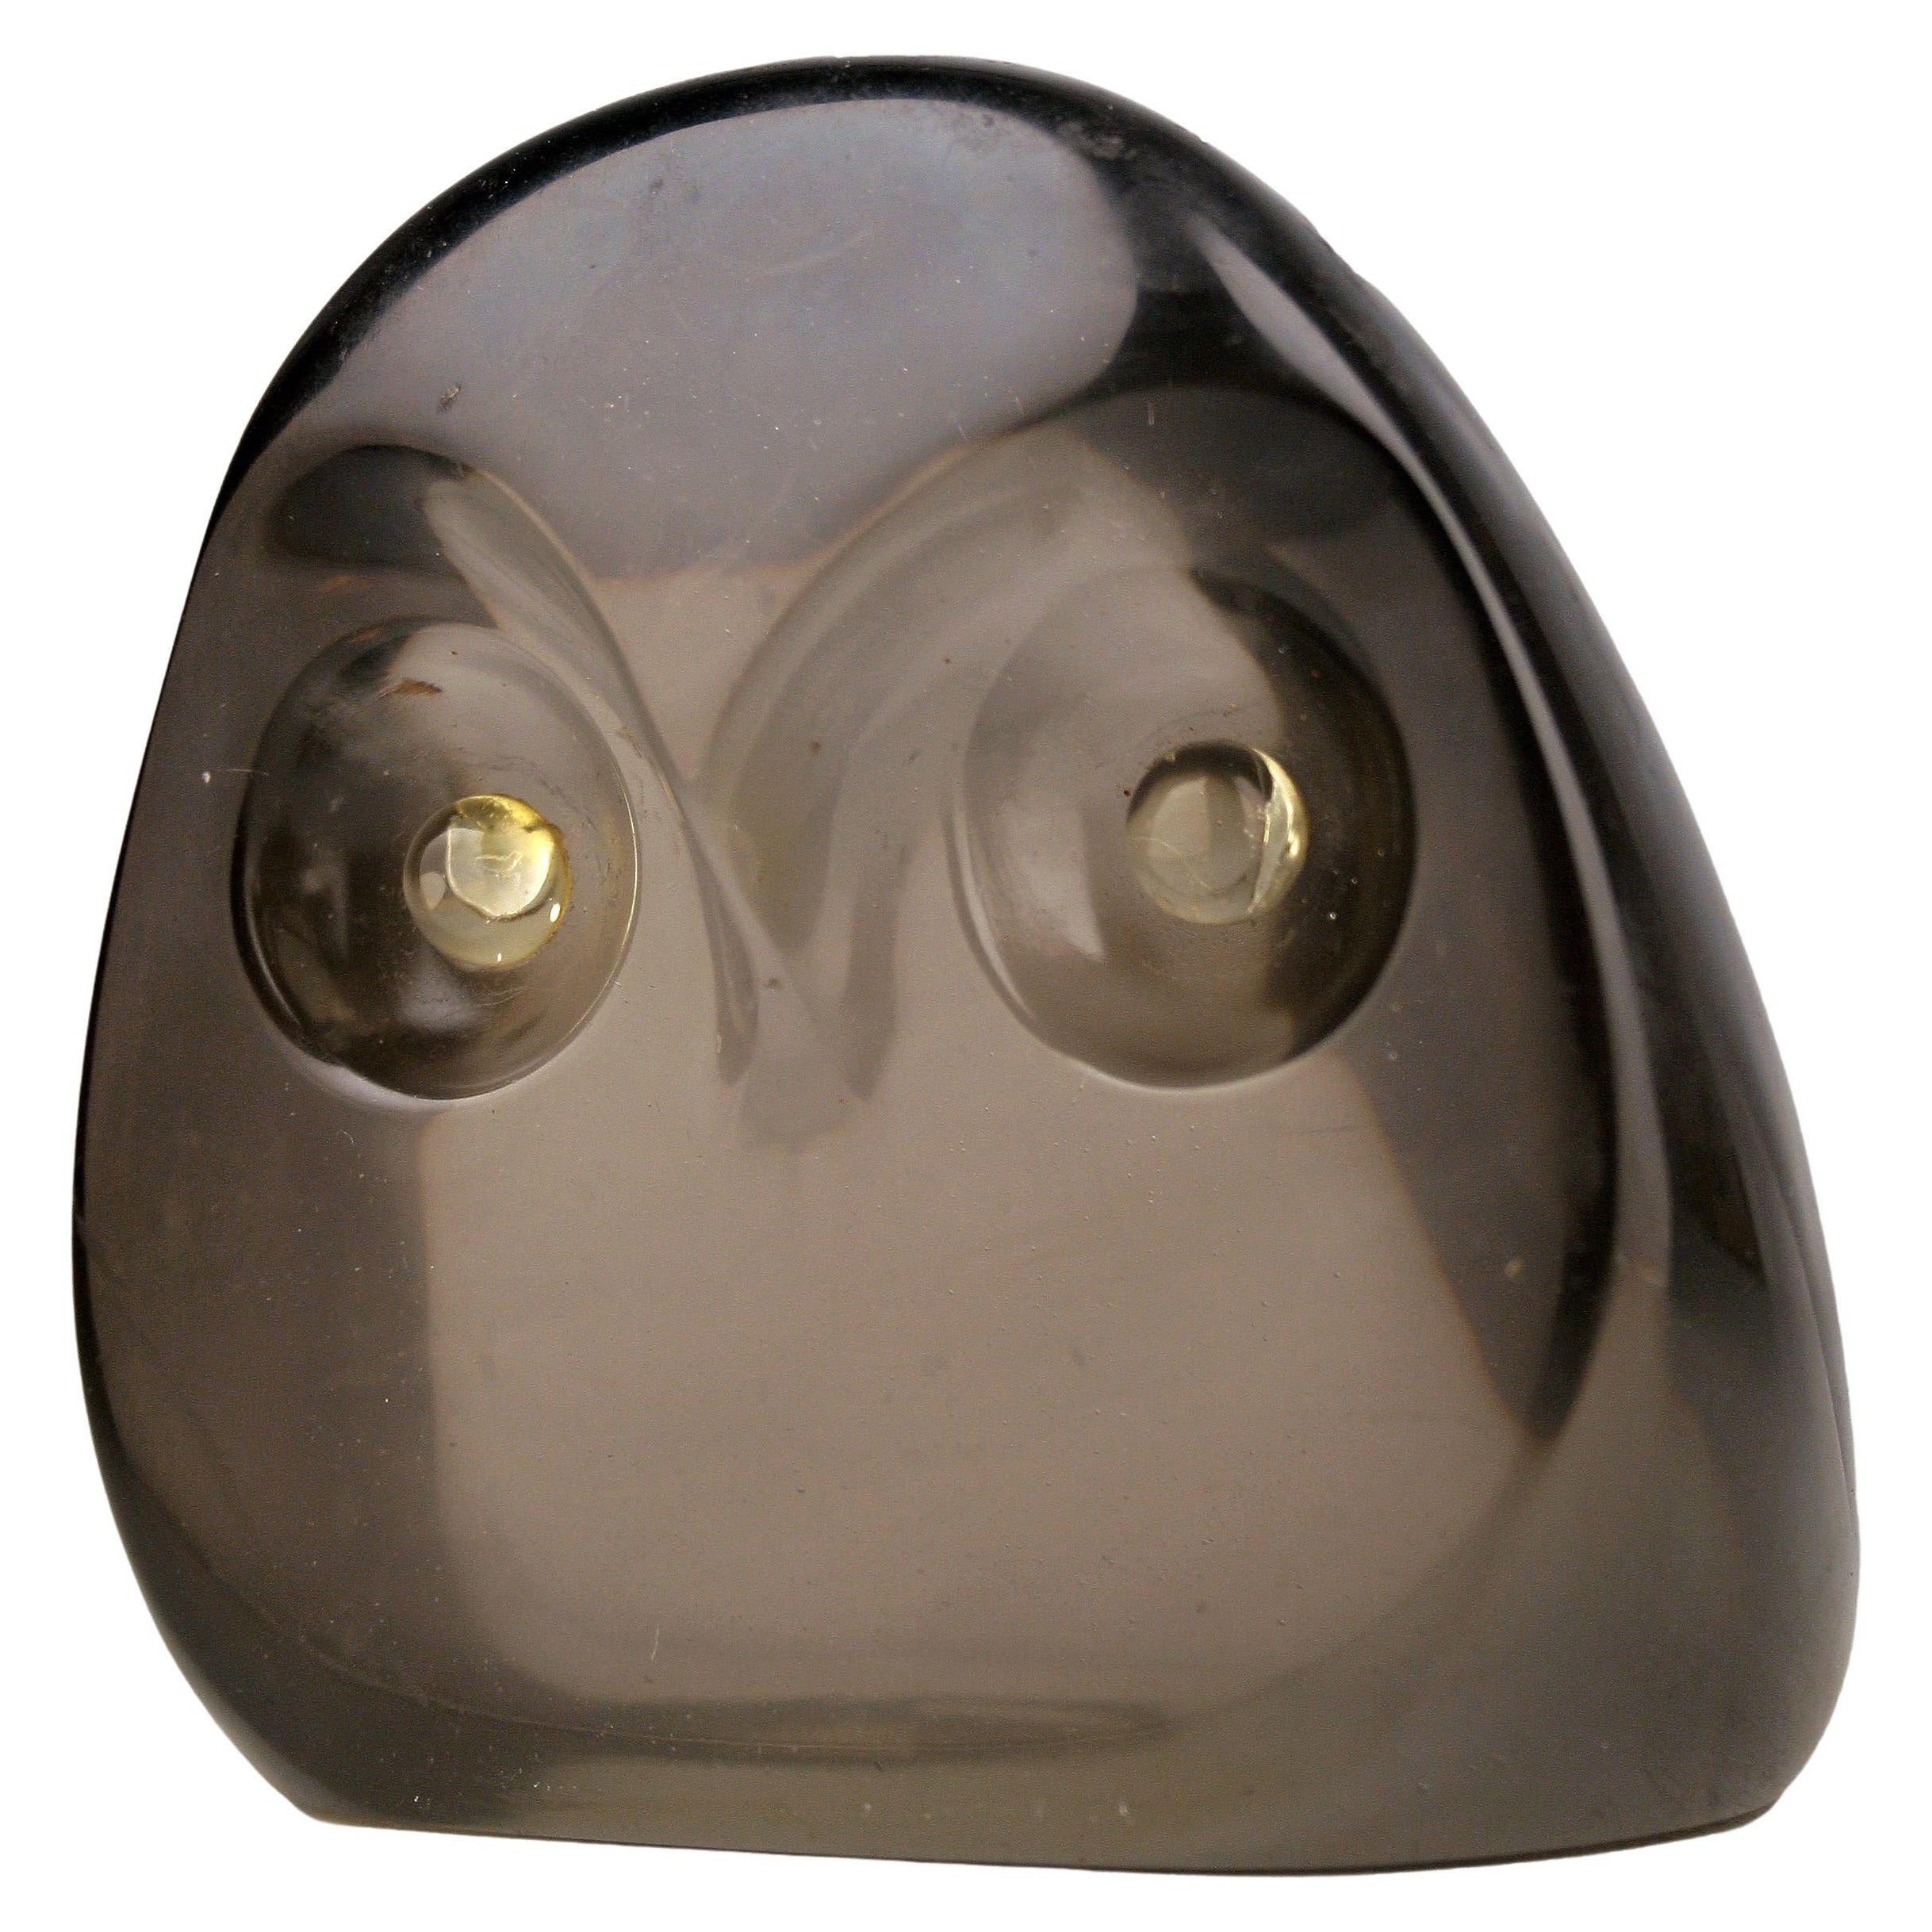 Translucent Acrylic/Lucite Owl Sculpture/Paperweight by Aldemir Martins, Brazil For Sale